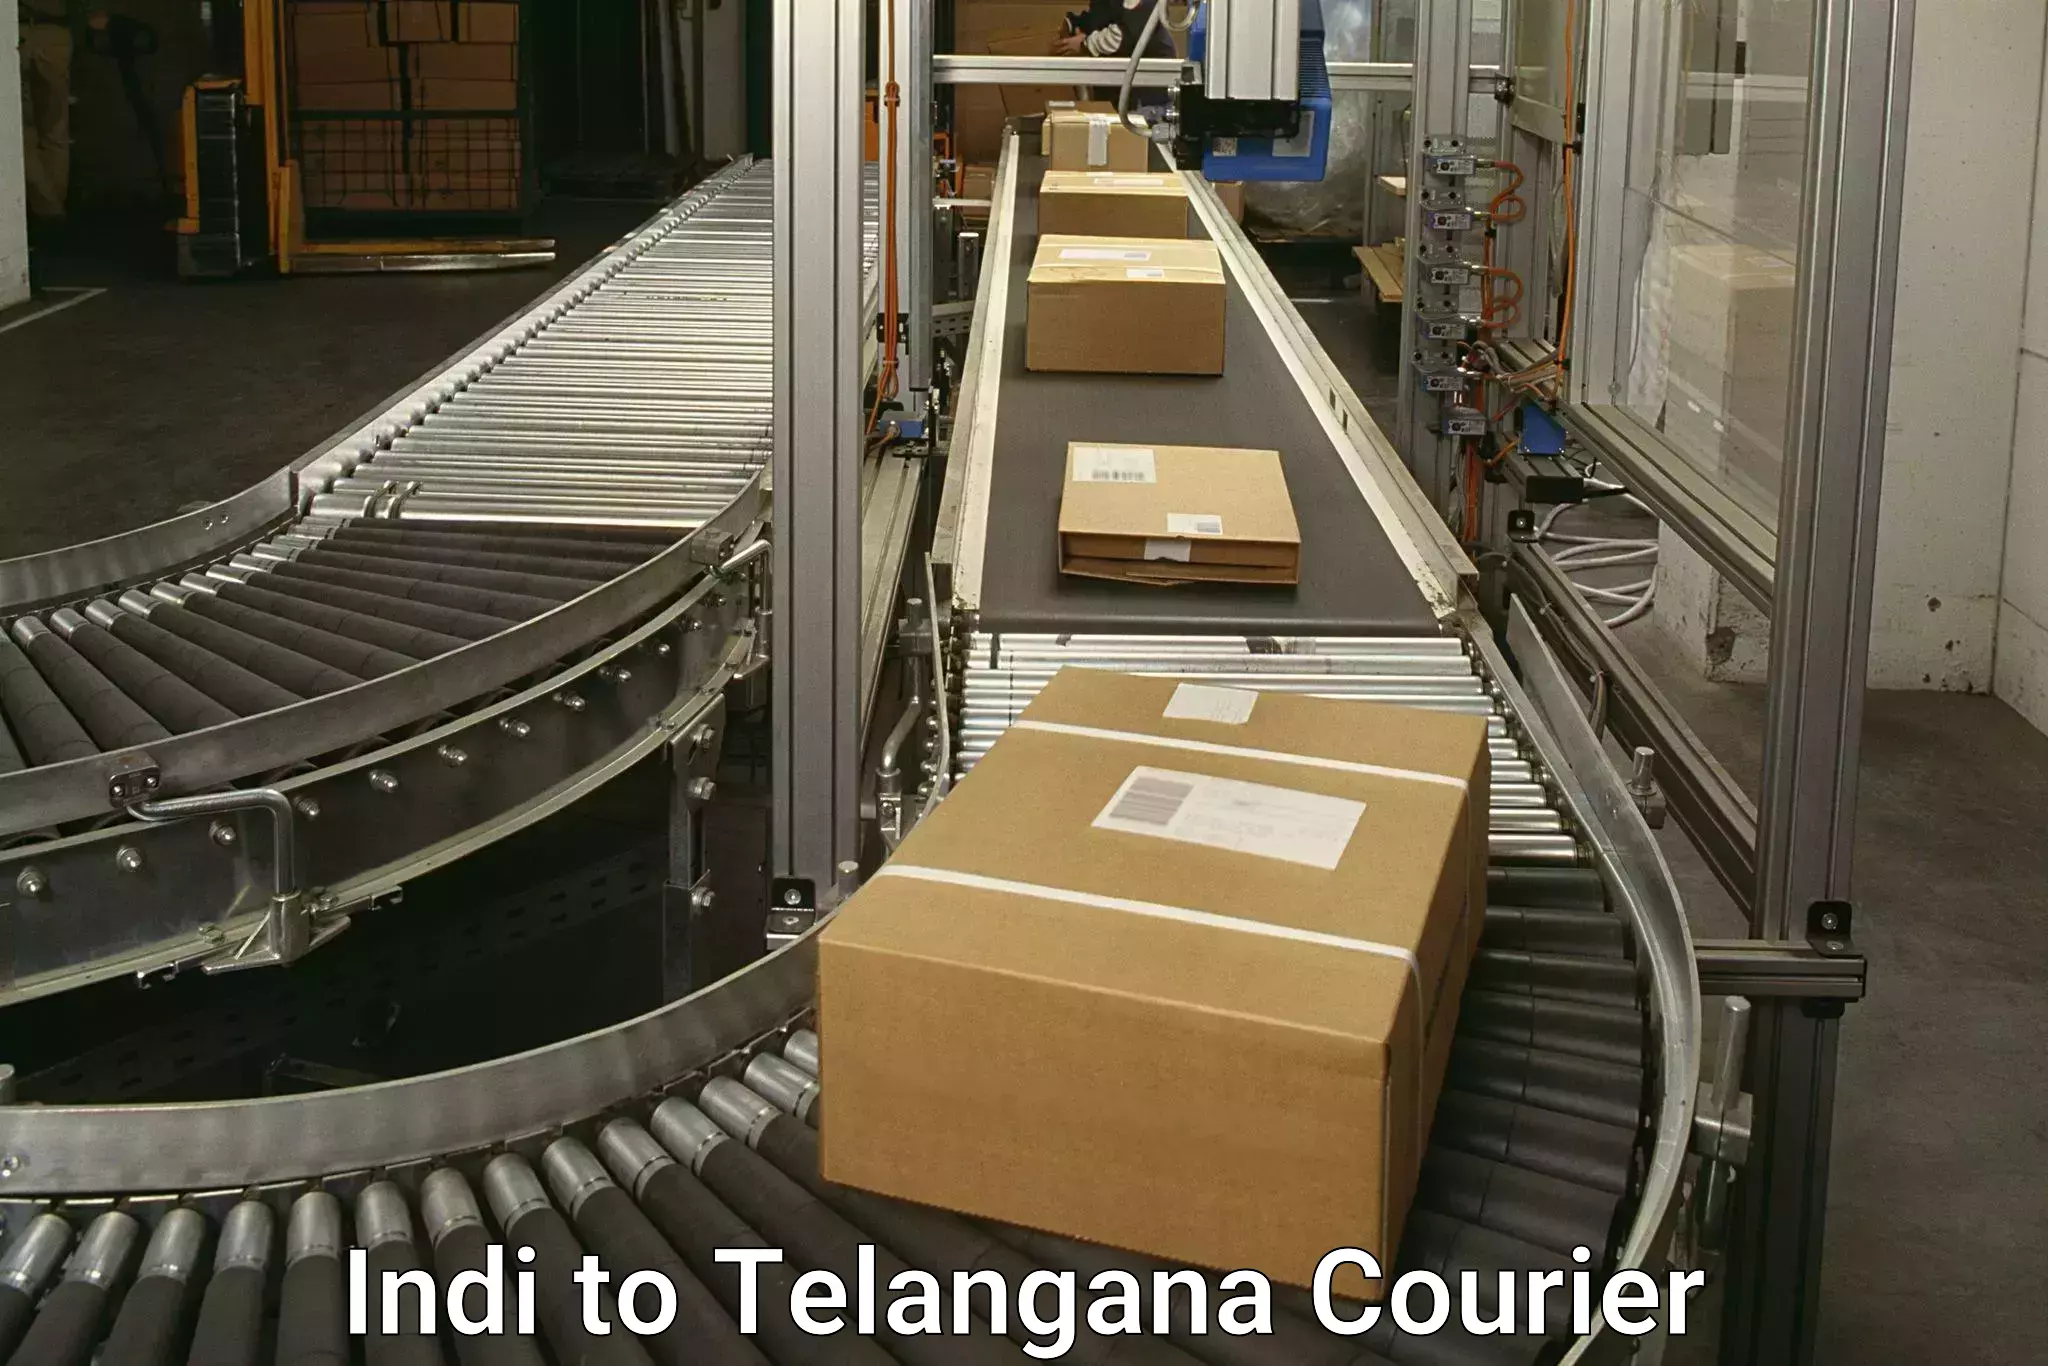 State-of-the-art courier technology Indi to Telangana